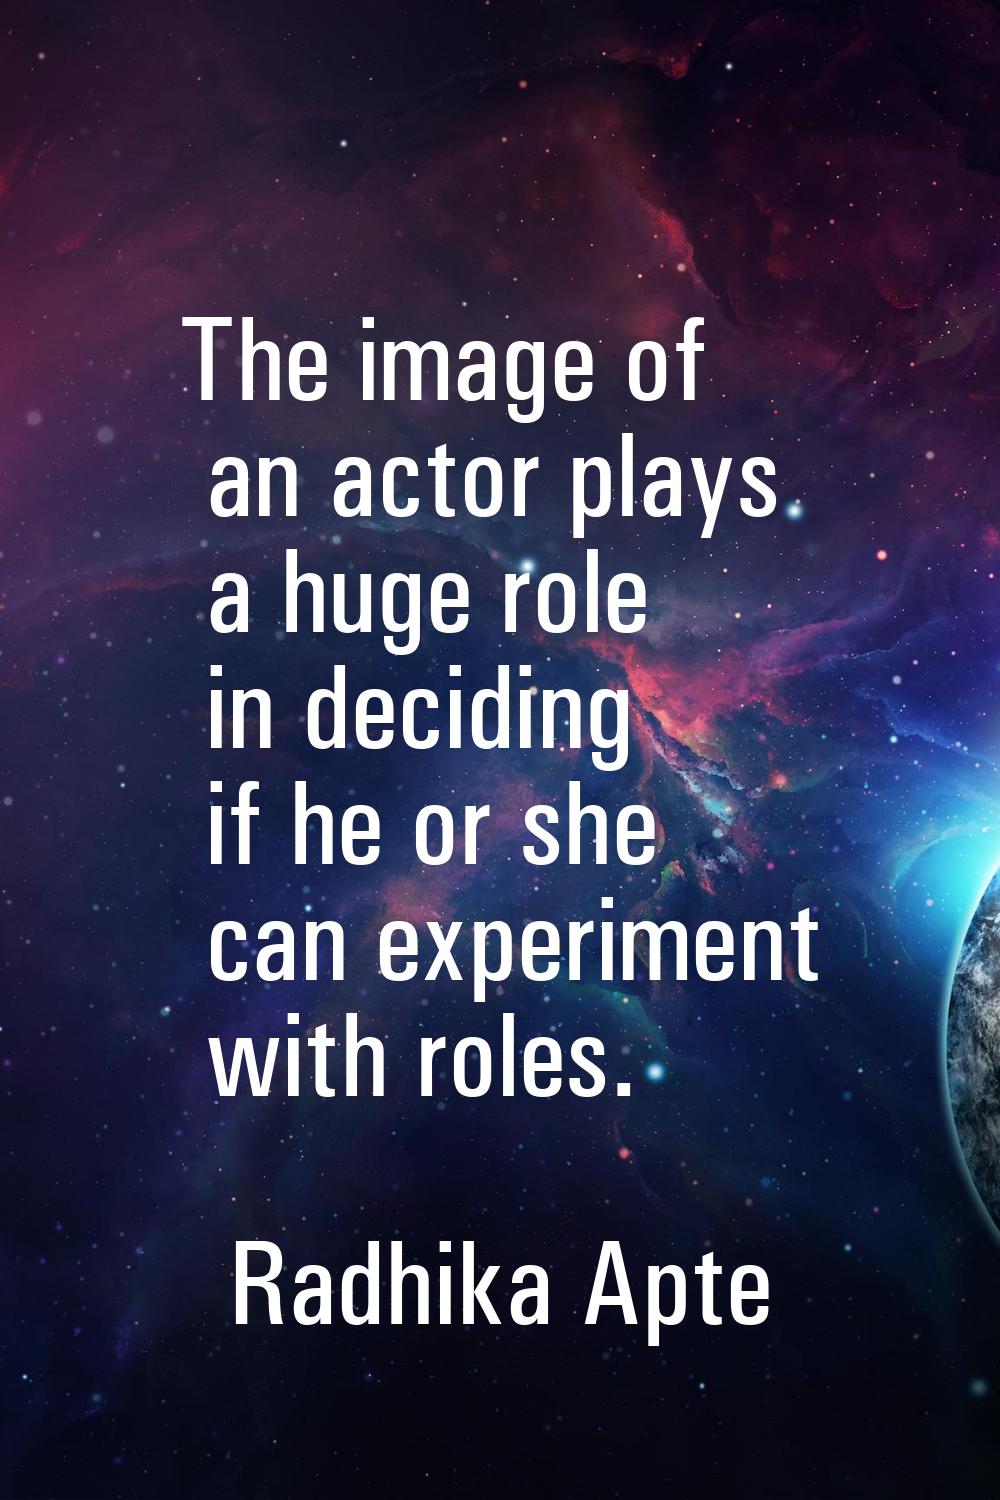 The image of an actor plays a huge role in deciding if he or she can experiment with roles.